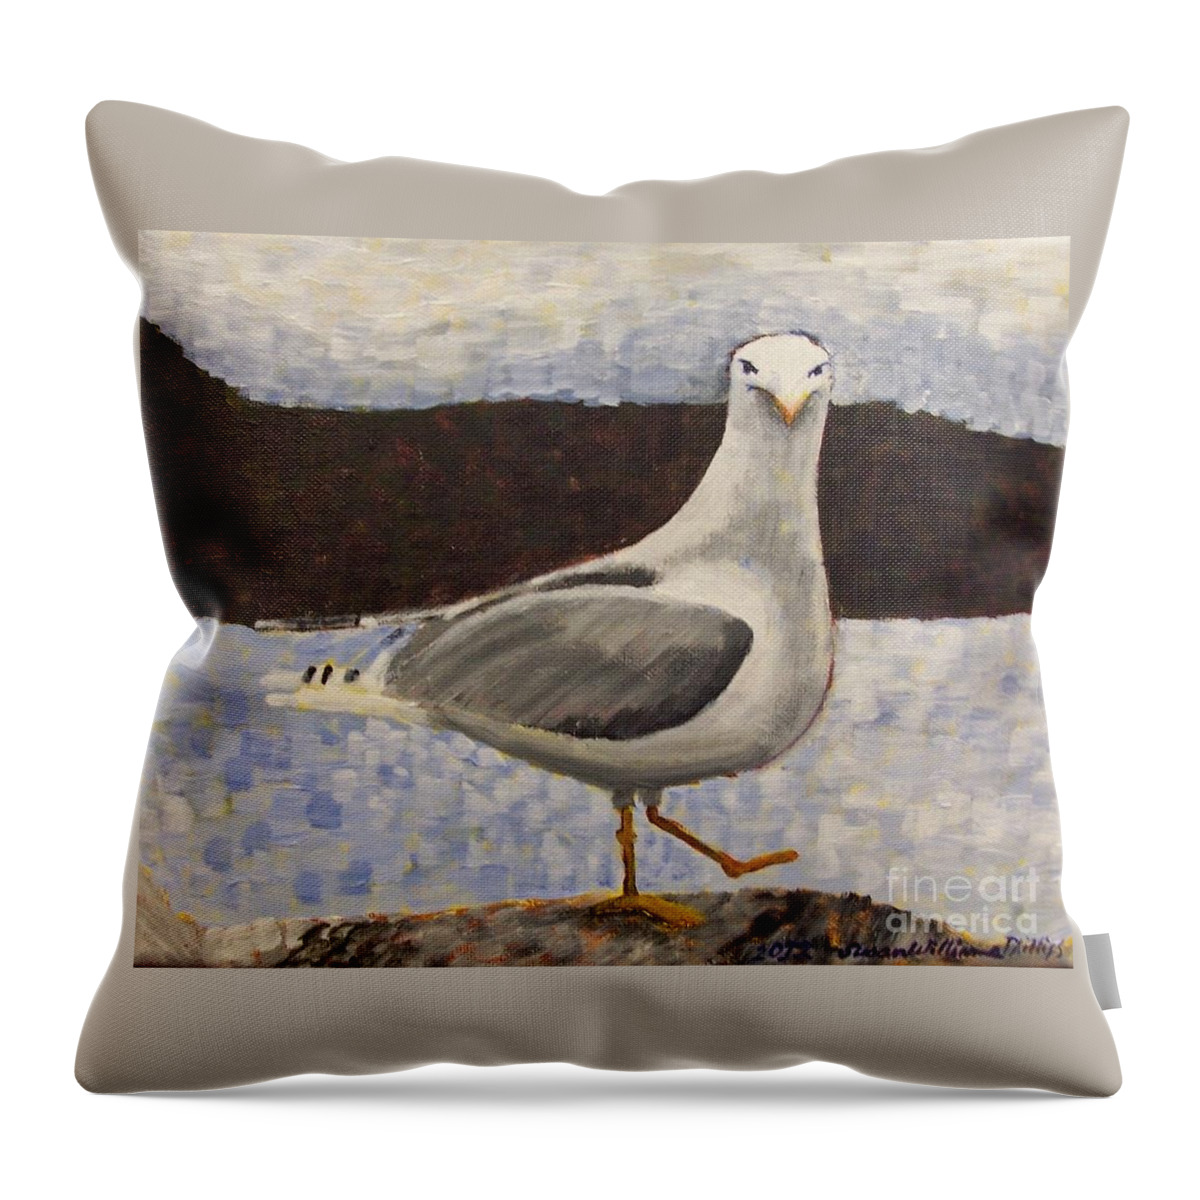 Bird Throw Pillow featuring the painting Scottish Seagull by Susan Williams